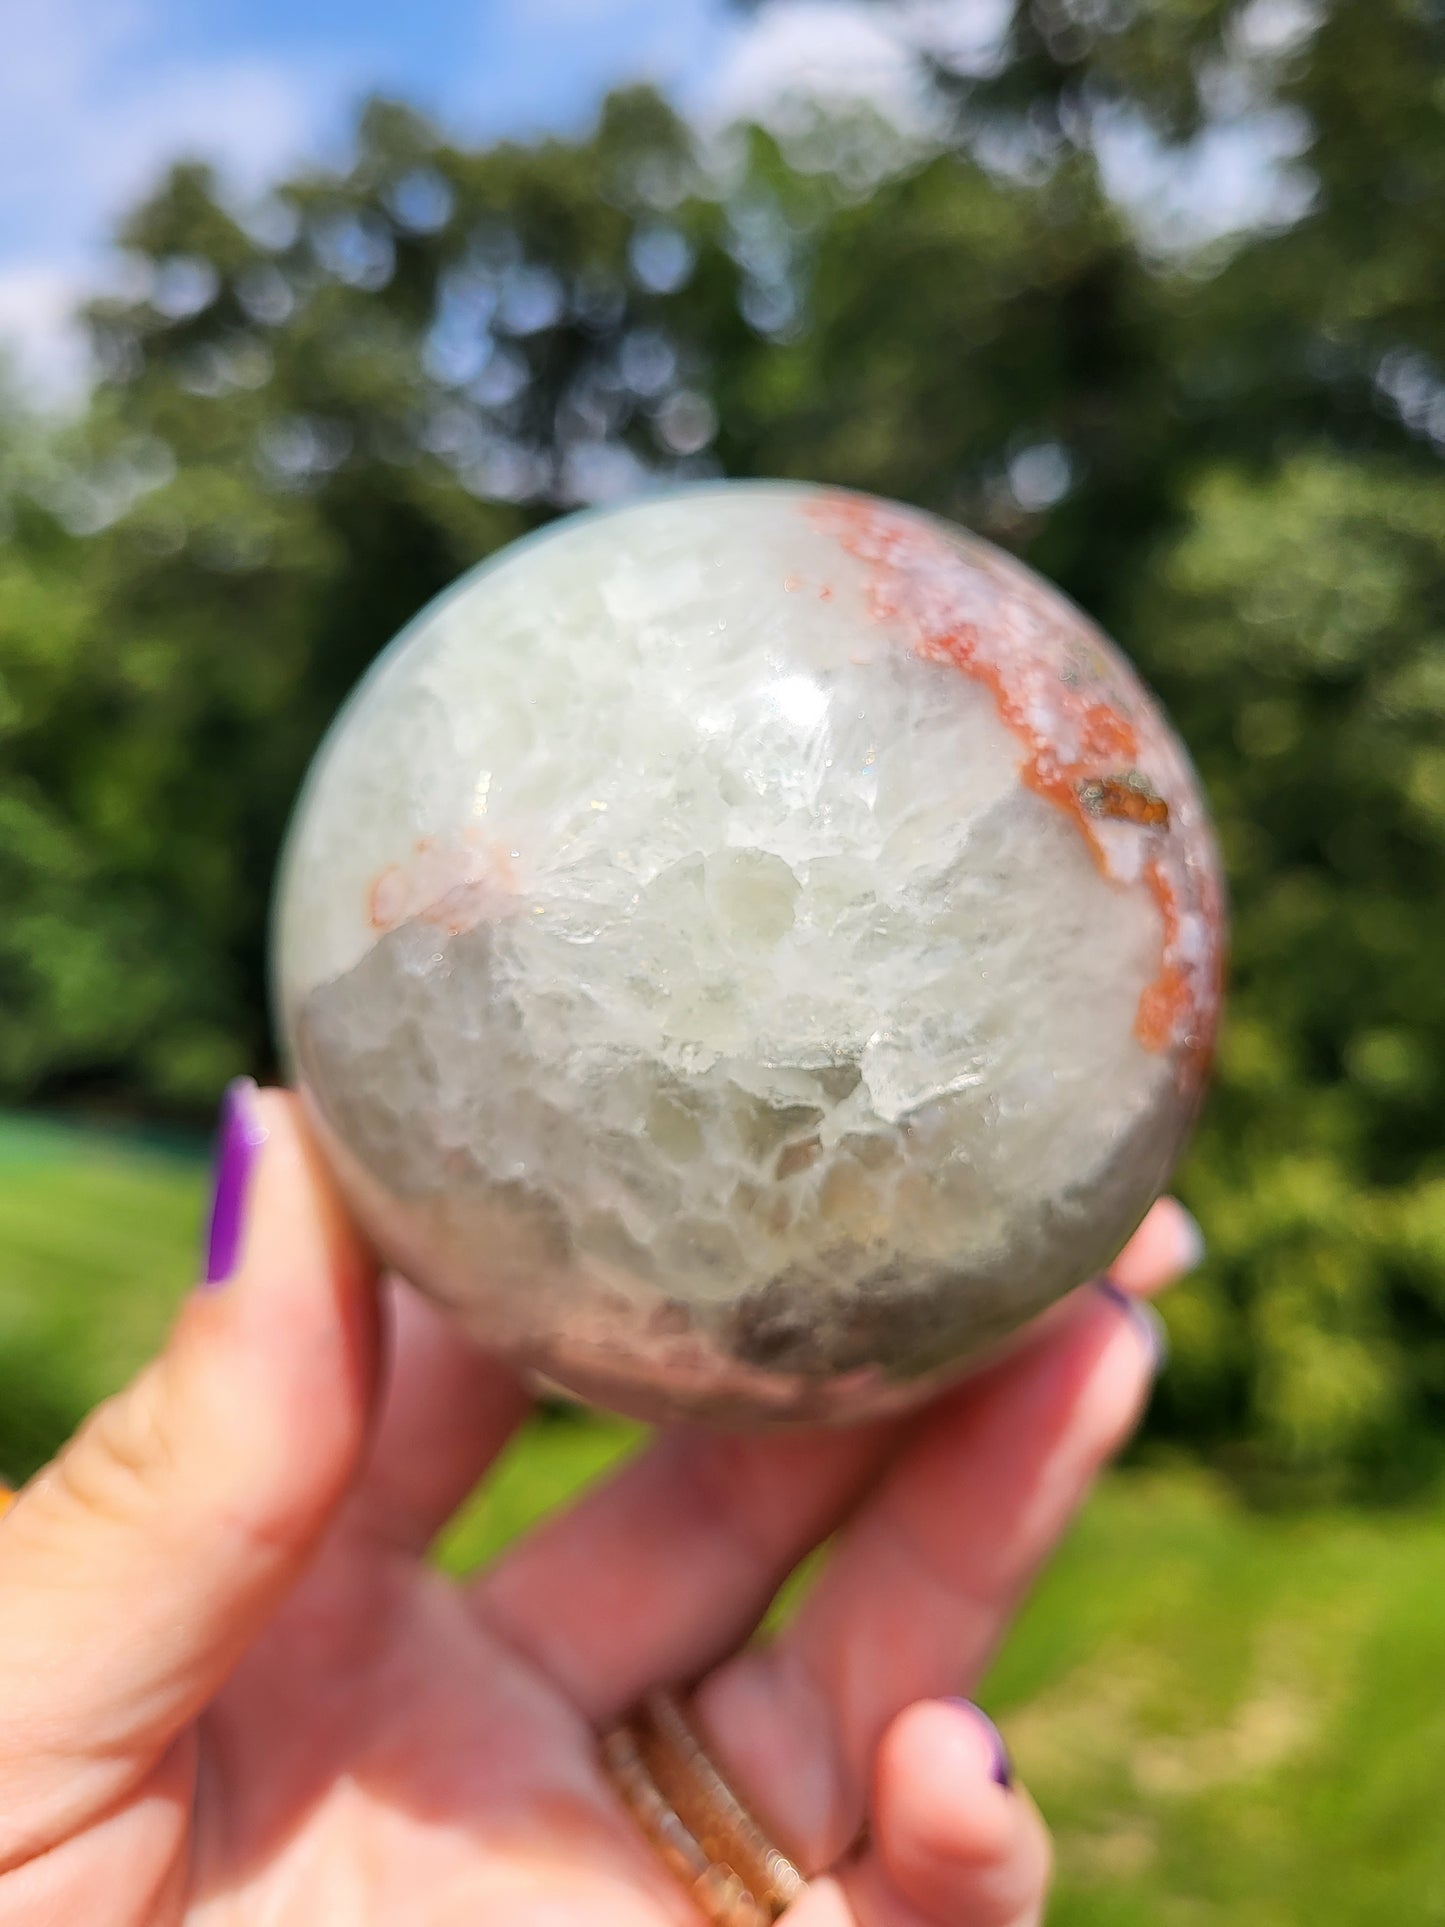 Green Quartz Sphere with Pink Amethyst Flowers (No. 1 of 3)